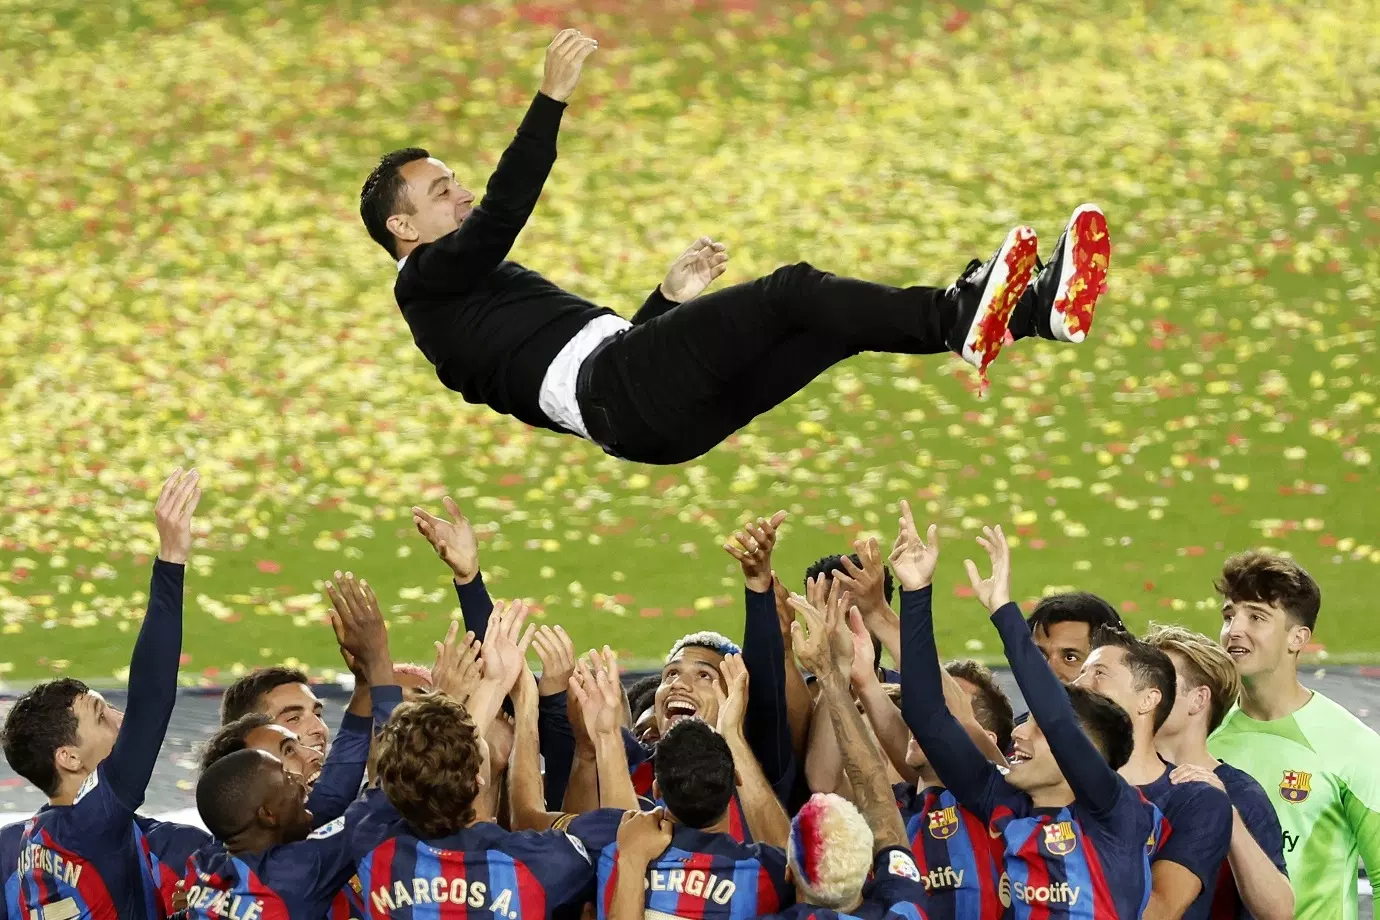 This Video Barcelona Celebrates Success in Winning the Spanish League at Camp Nou